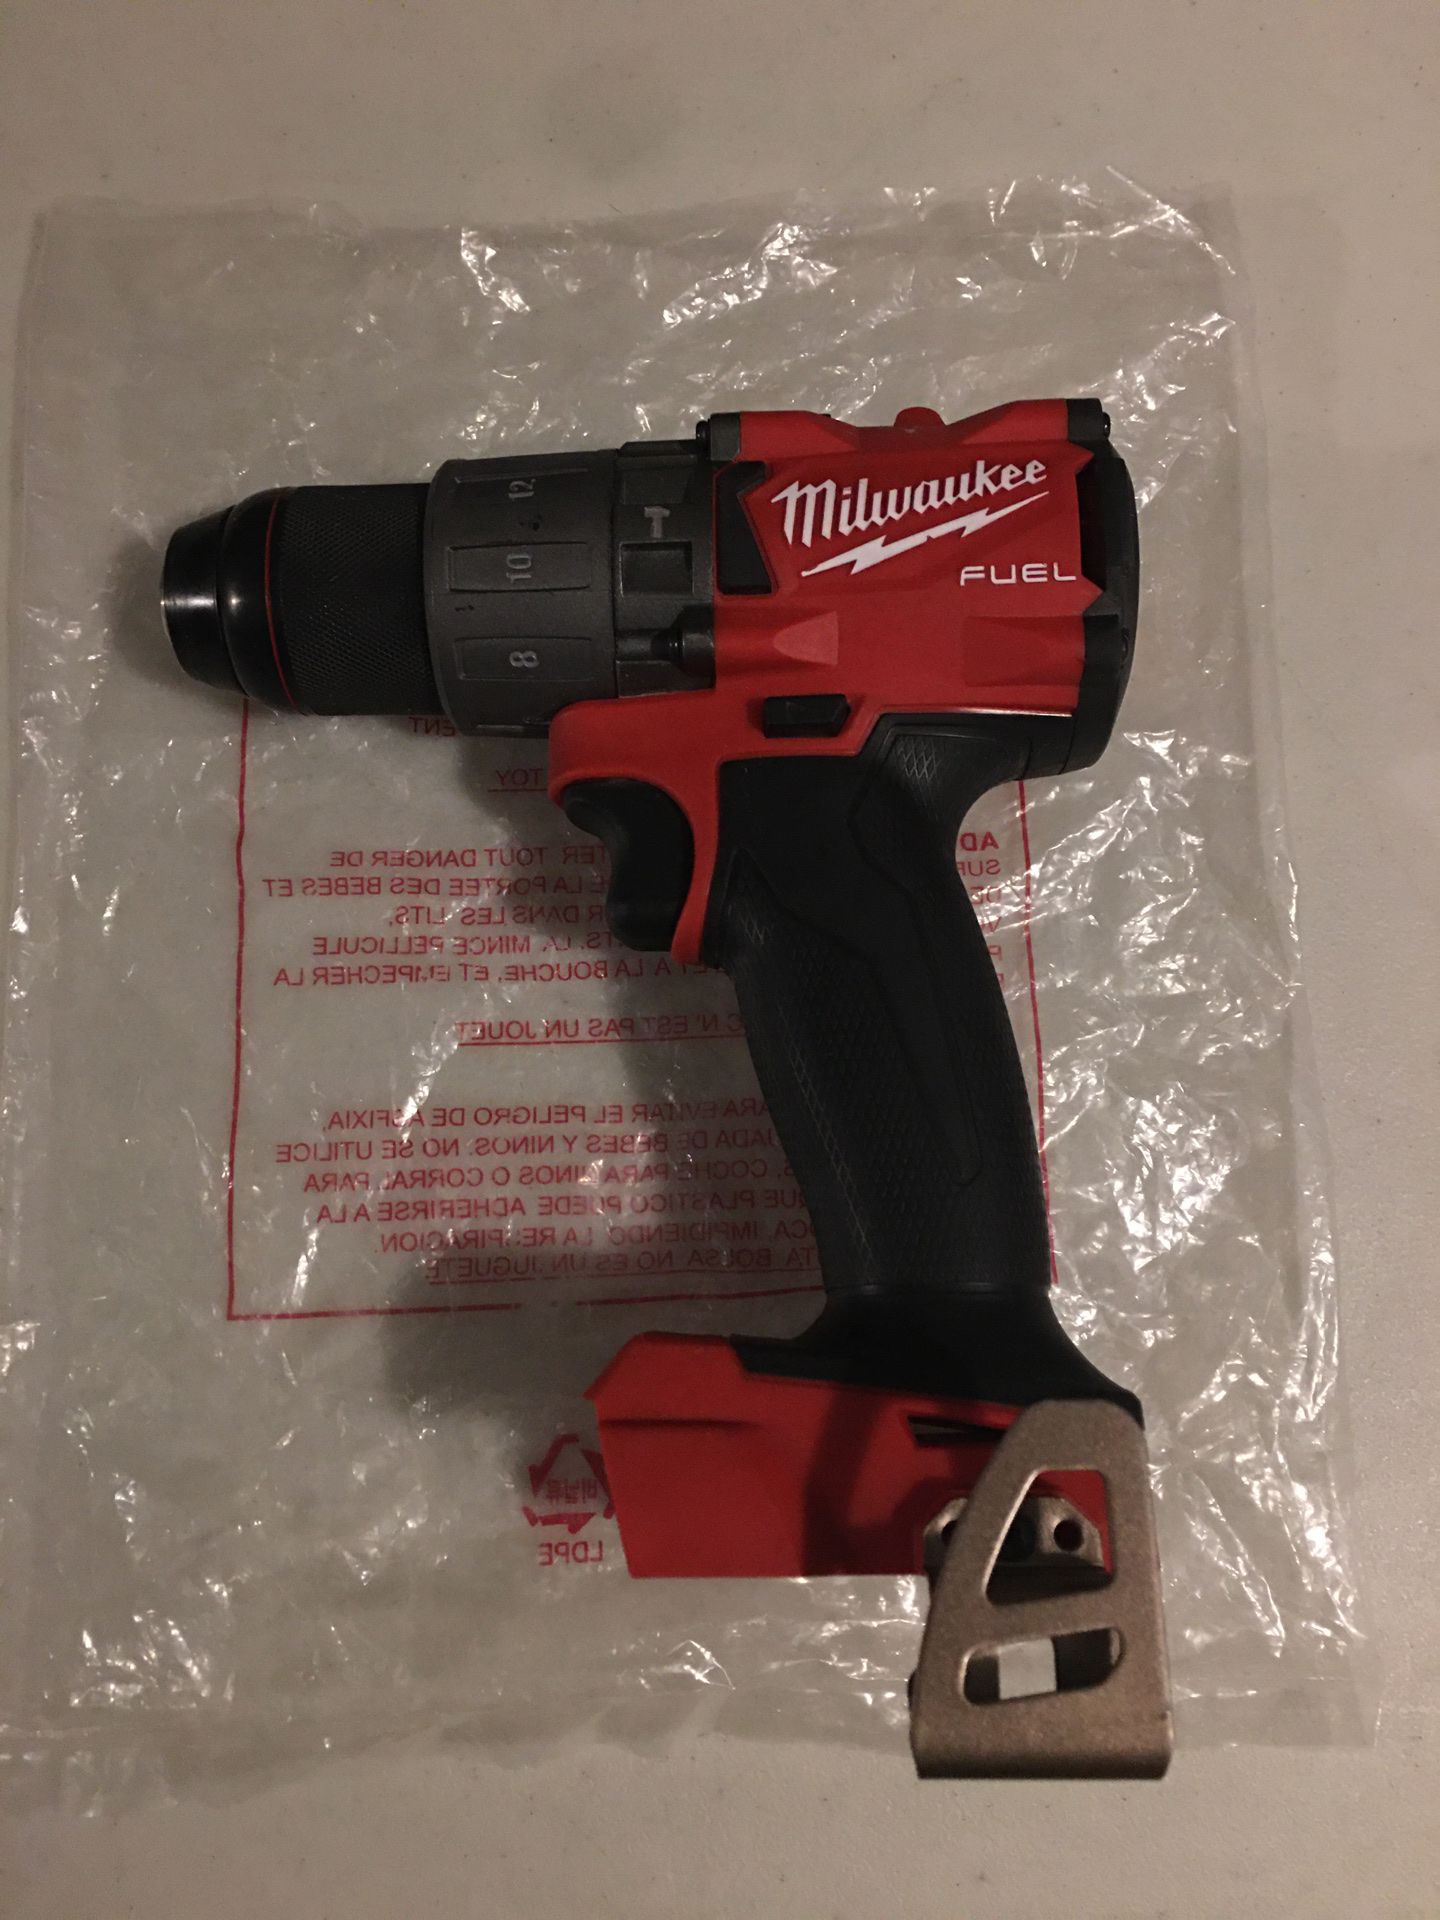 Milwaukee m18 hammer drill !!!! Tool only !!!! Pick up only !!!! Please dont waste my time !!!! $149.00 Home Depot plus tax